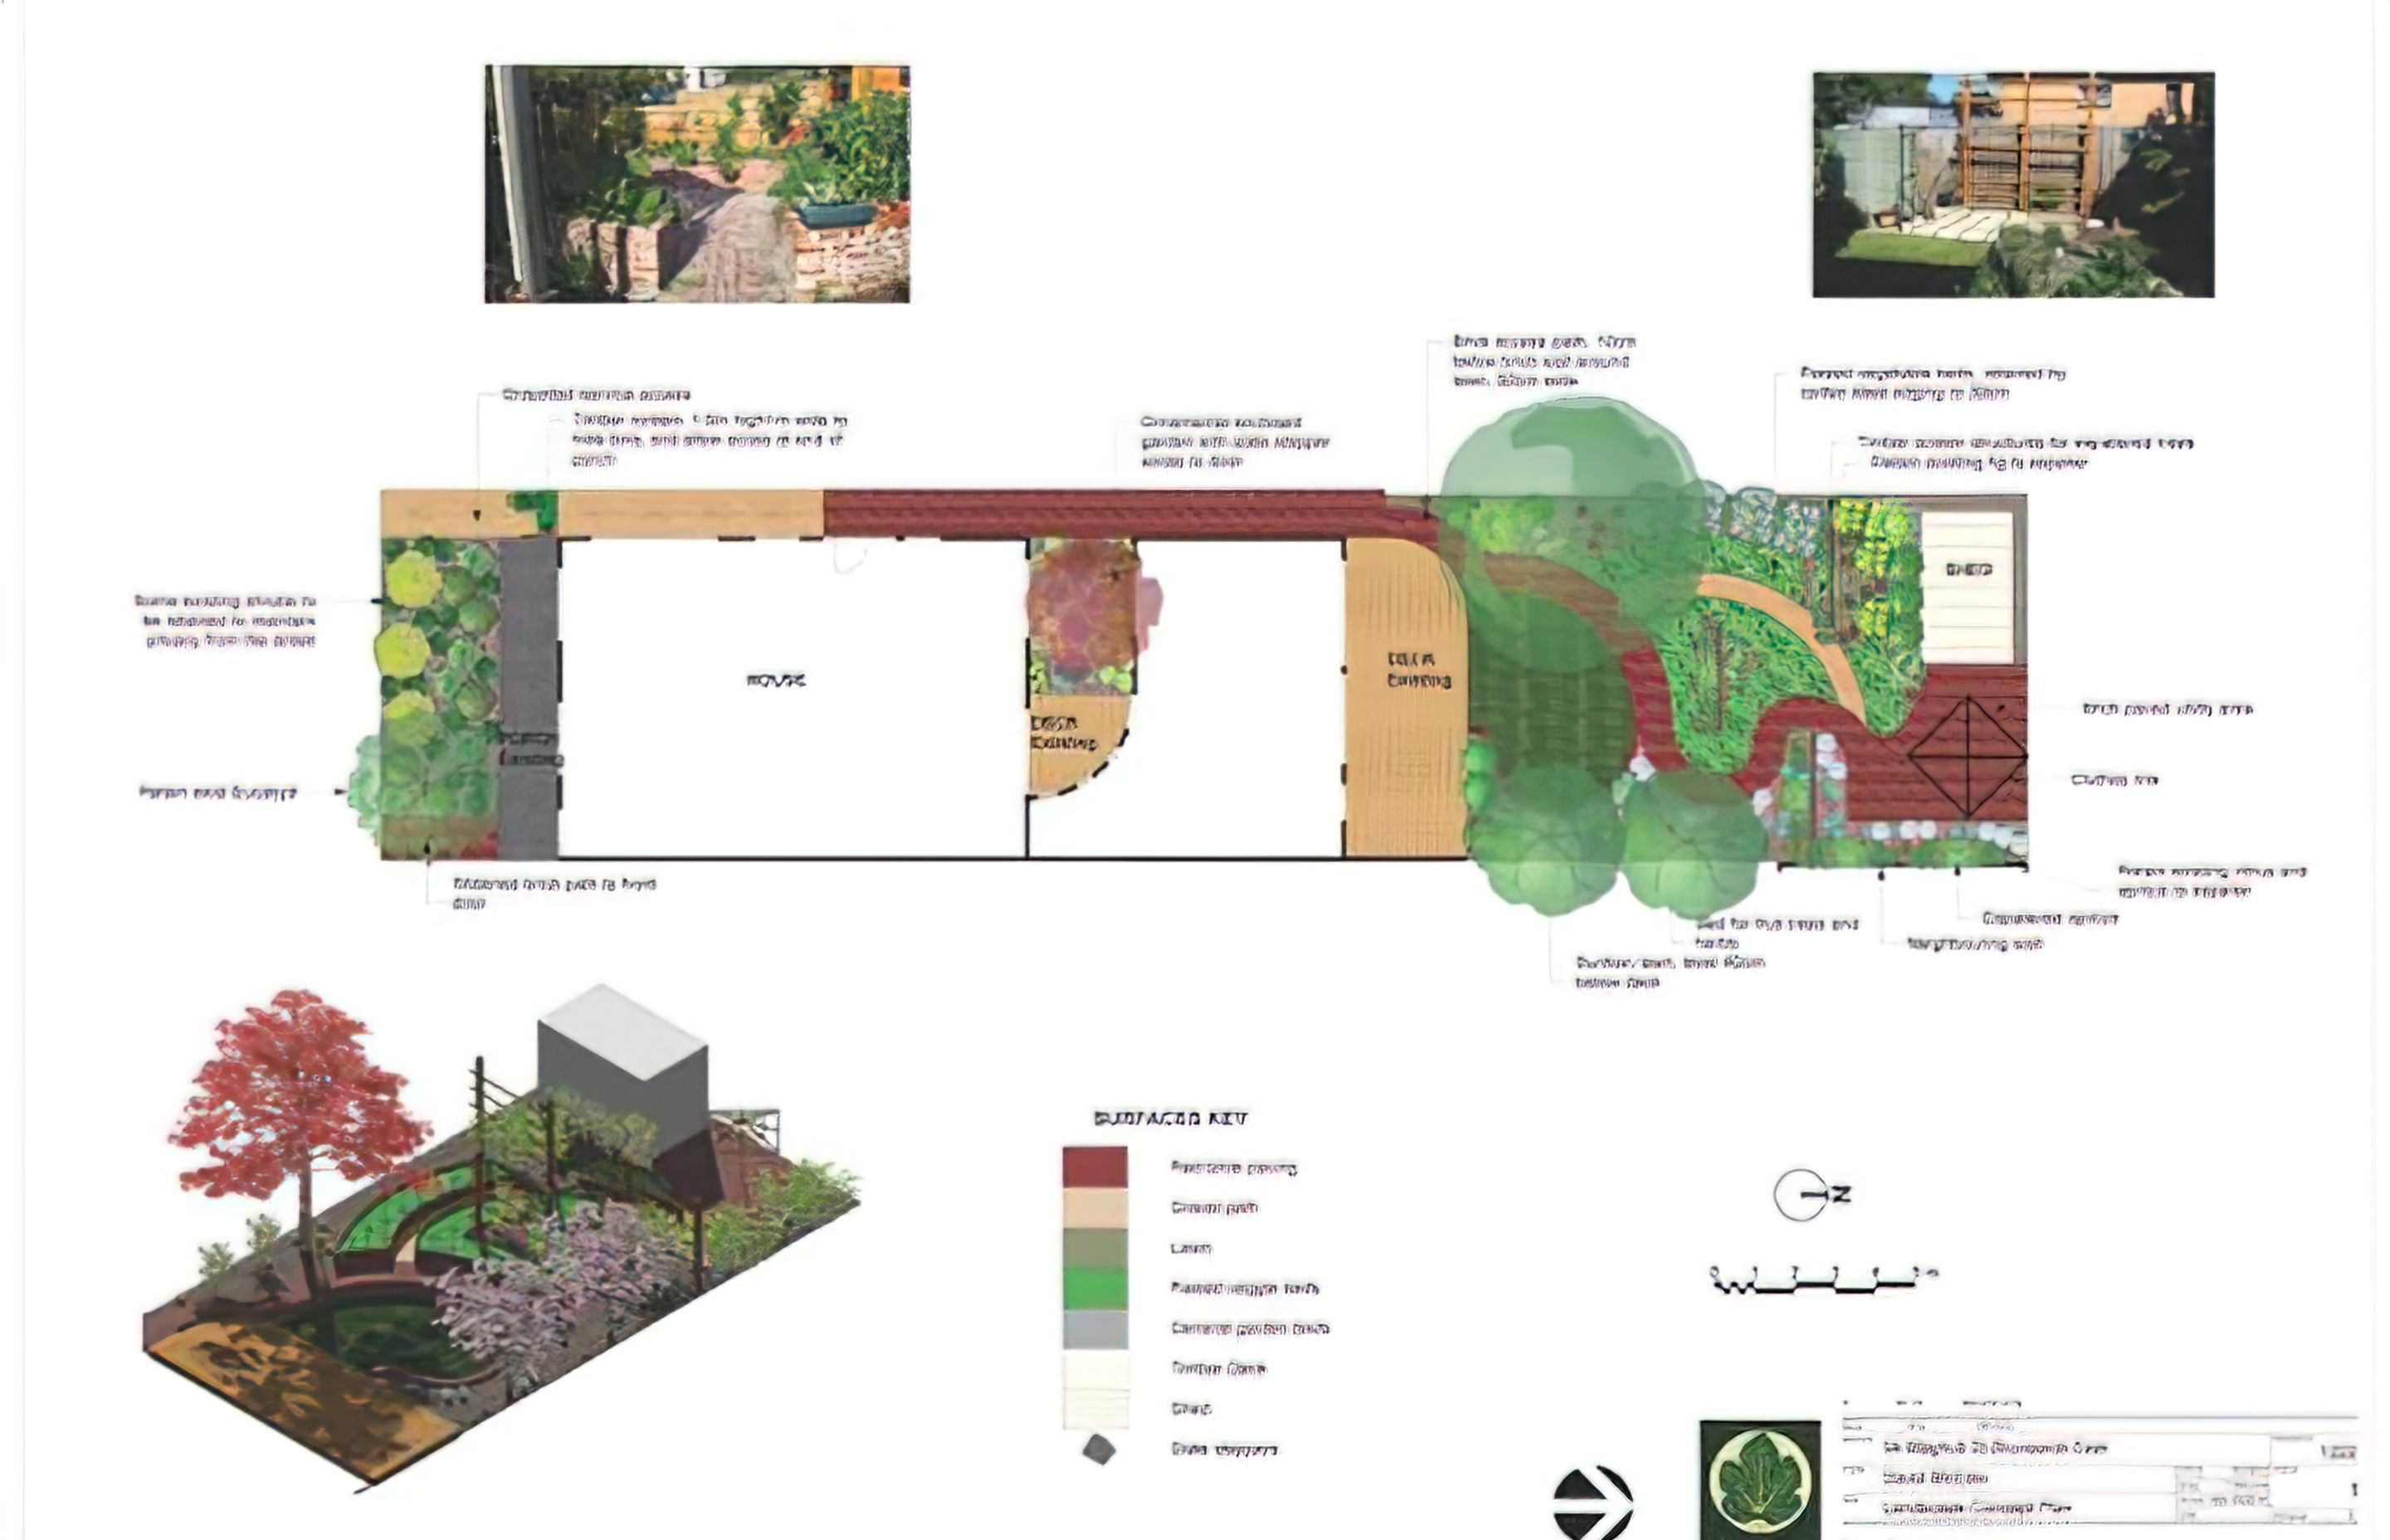 The Concept Plan - Create a productive garden that is attractive and efficient